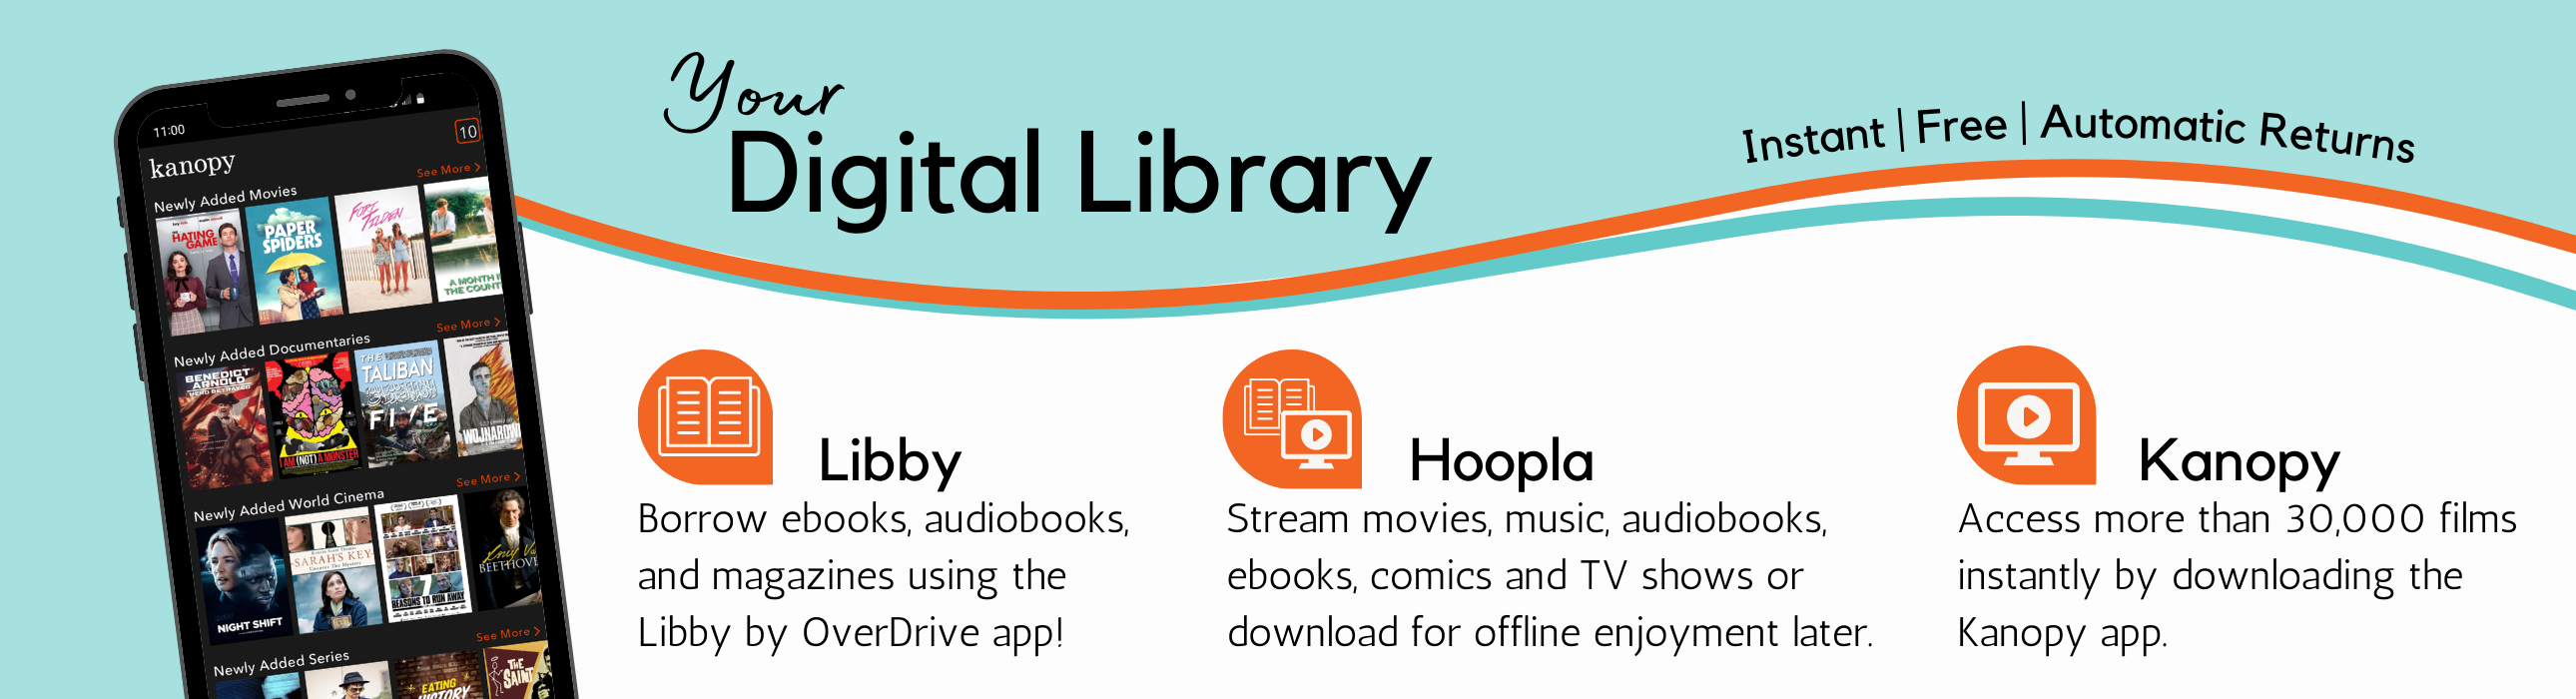 Cell phone next to "Your Digital Library" with a wavy underline. Libby, Hoopla, and Kanopy apps listed with icons.